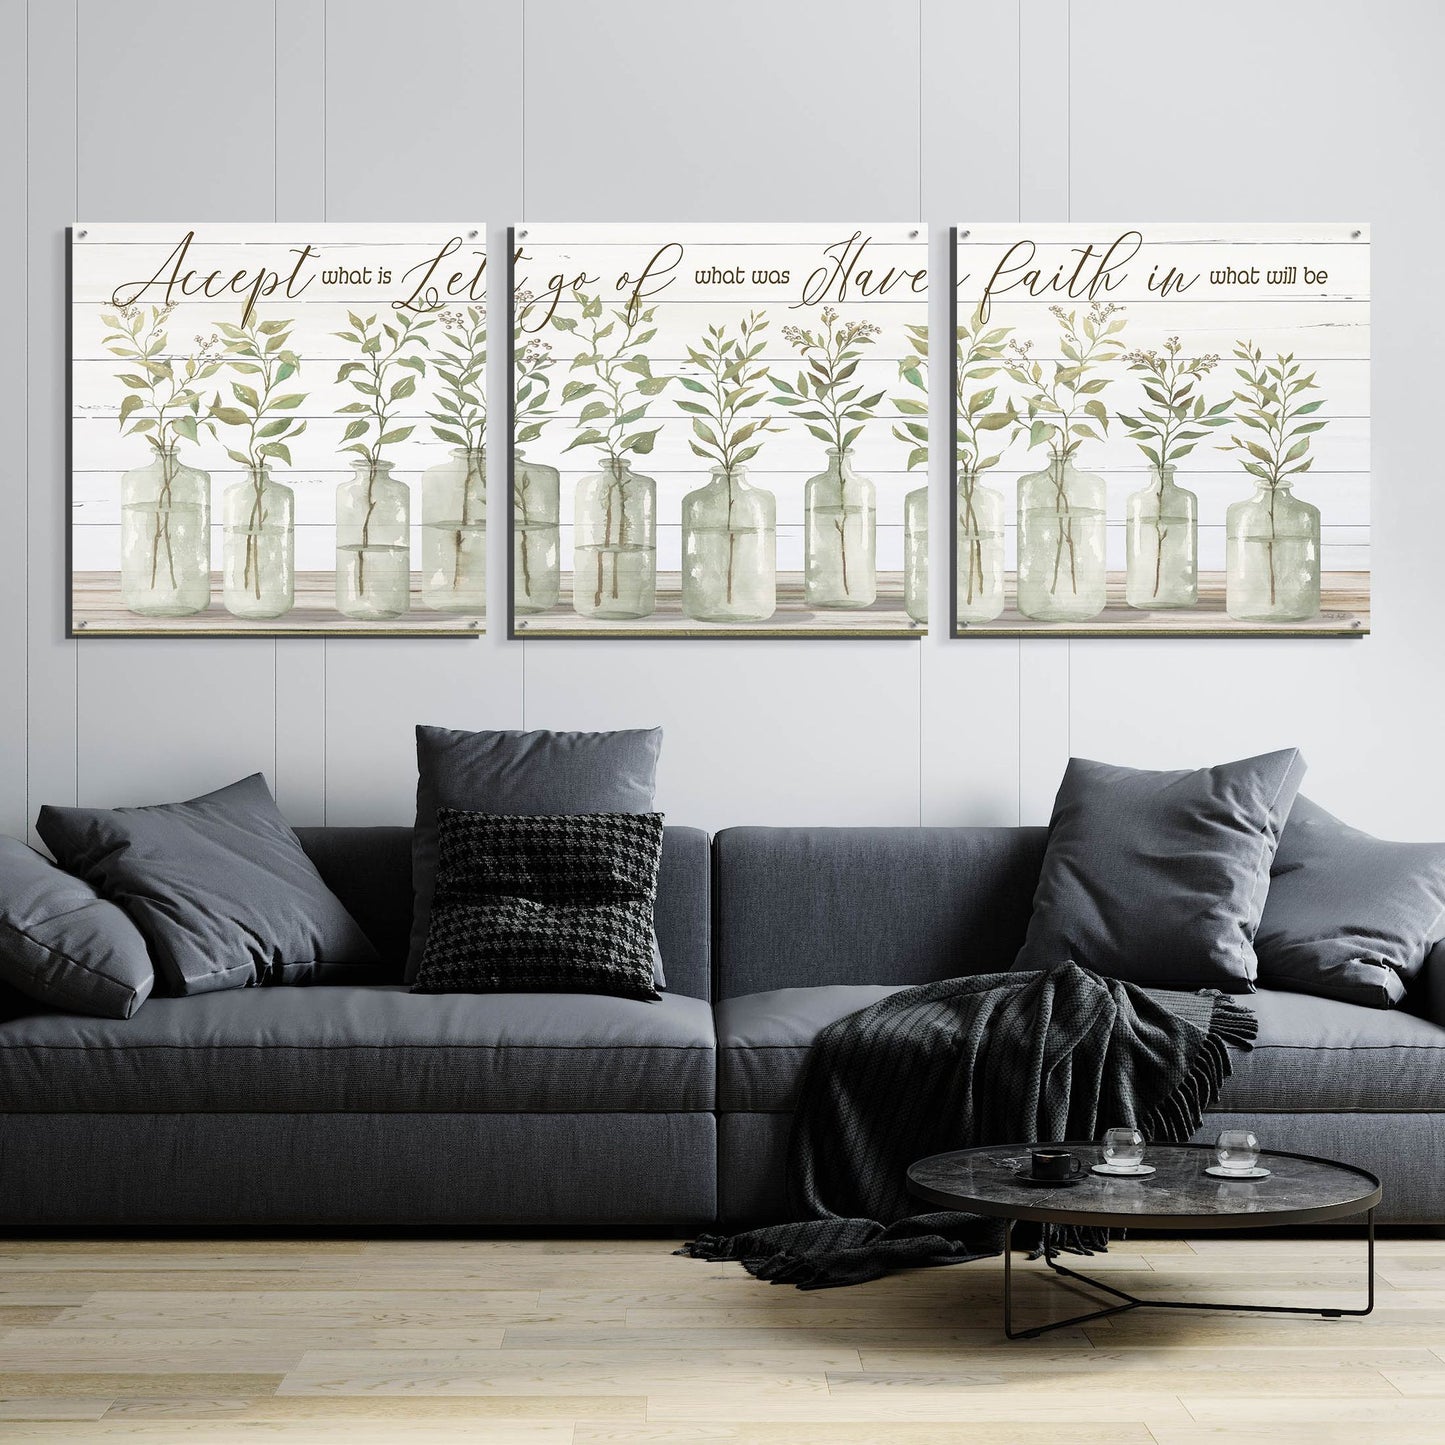 Epic Art 'Accept What Is' by Cindy Jacobs, Acrylic Glass Wall Art, 3 Piece Set,108x36